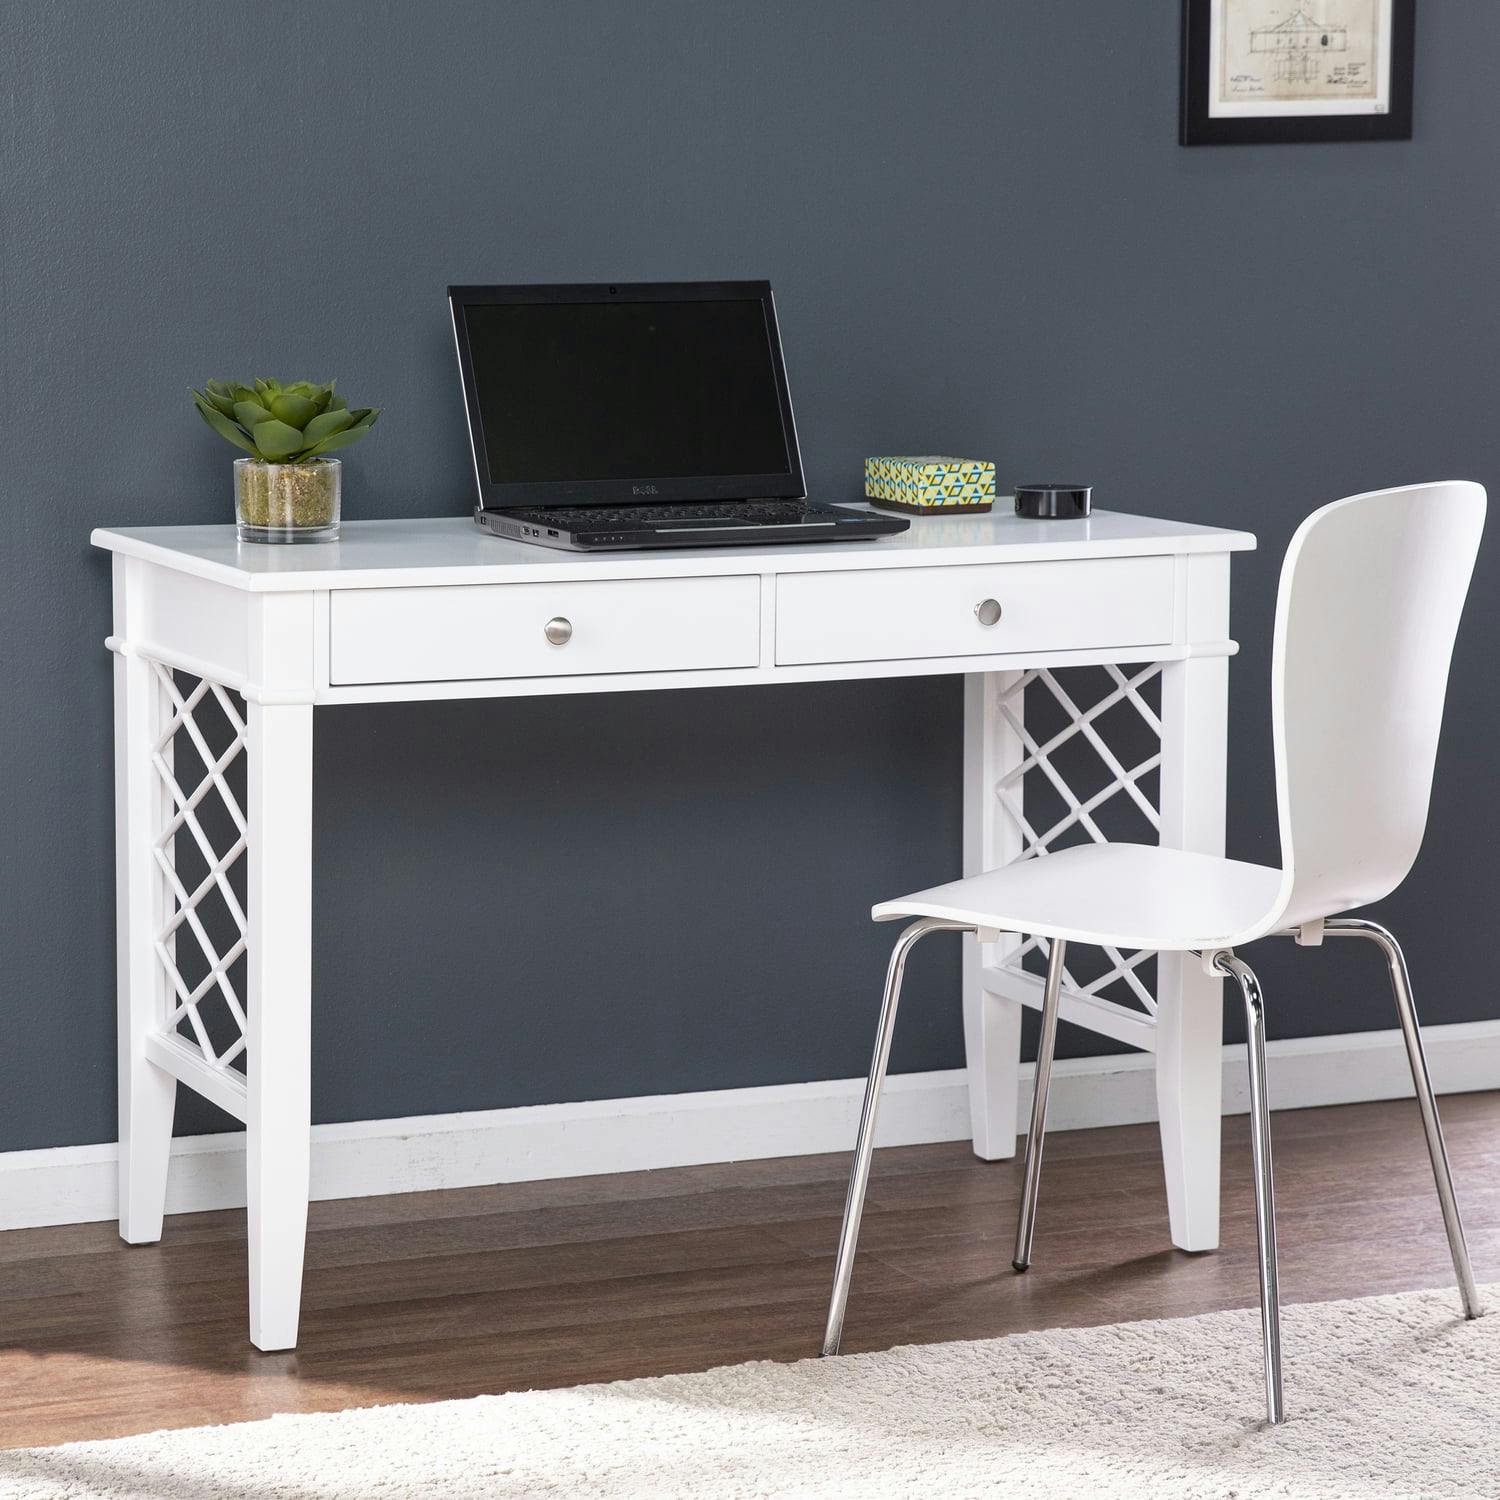 Classic White Wood Writing Desk with Lattice Side Panels and Drawers